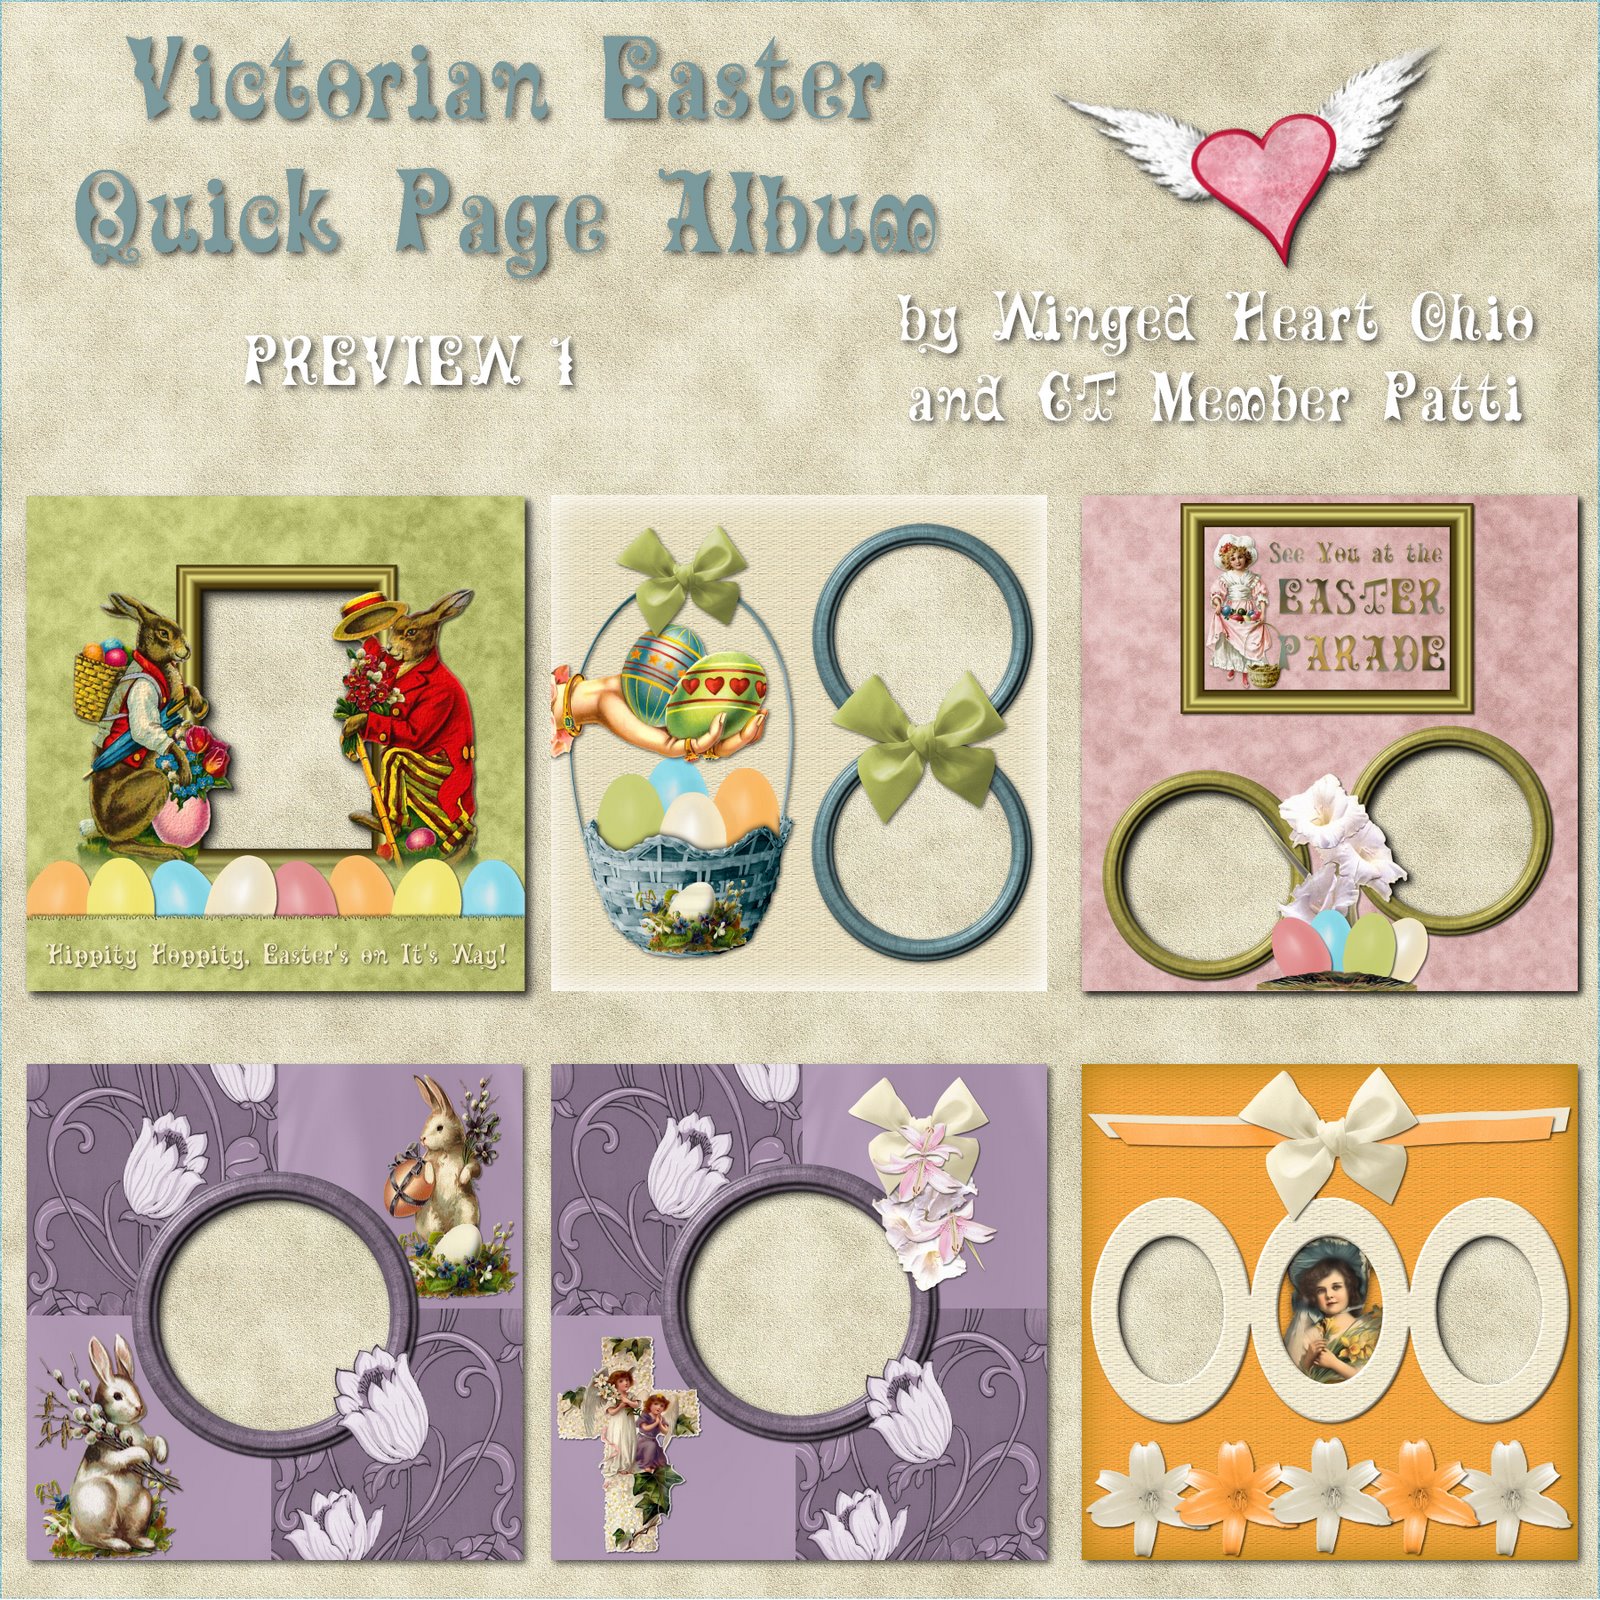 [WH_VictorianEaster_QPAlbum_Preview1.jpg]